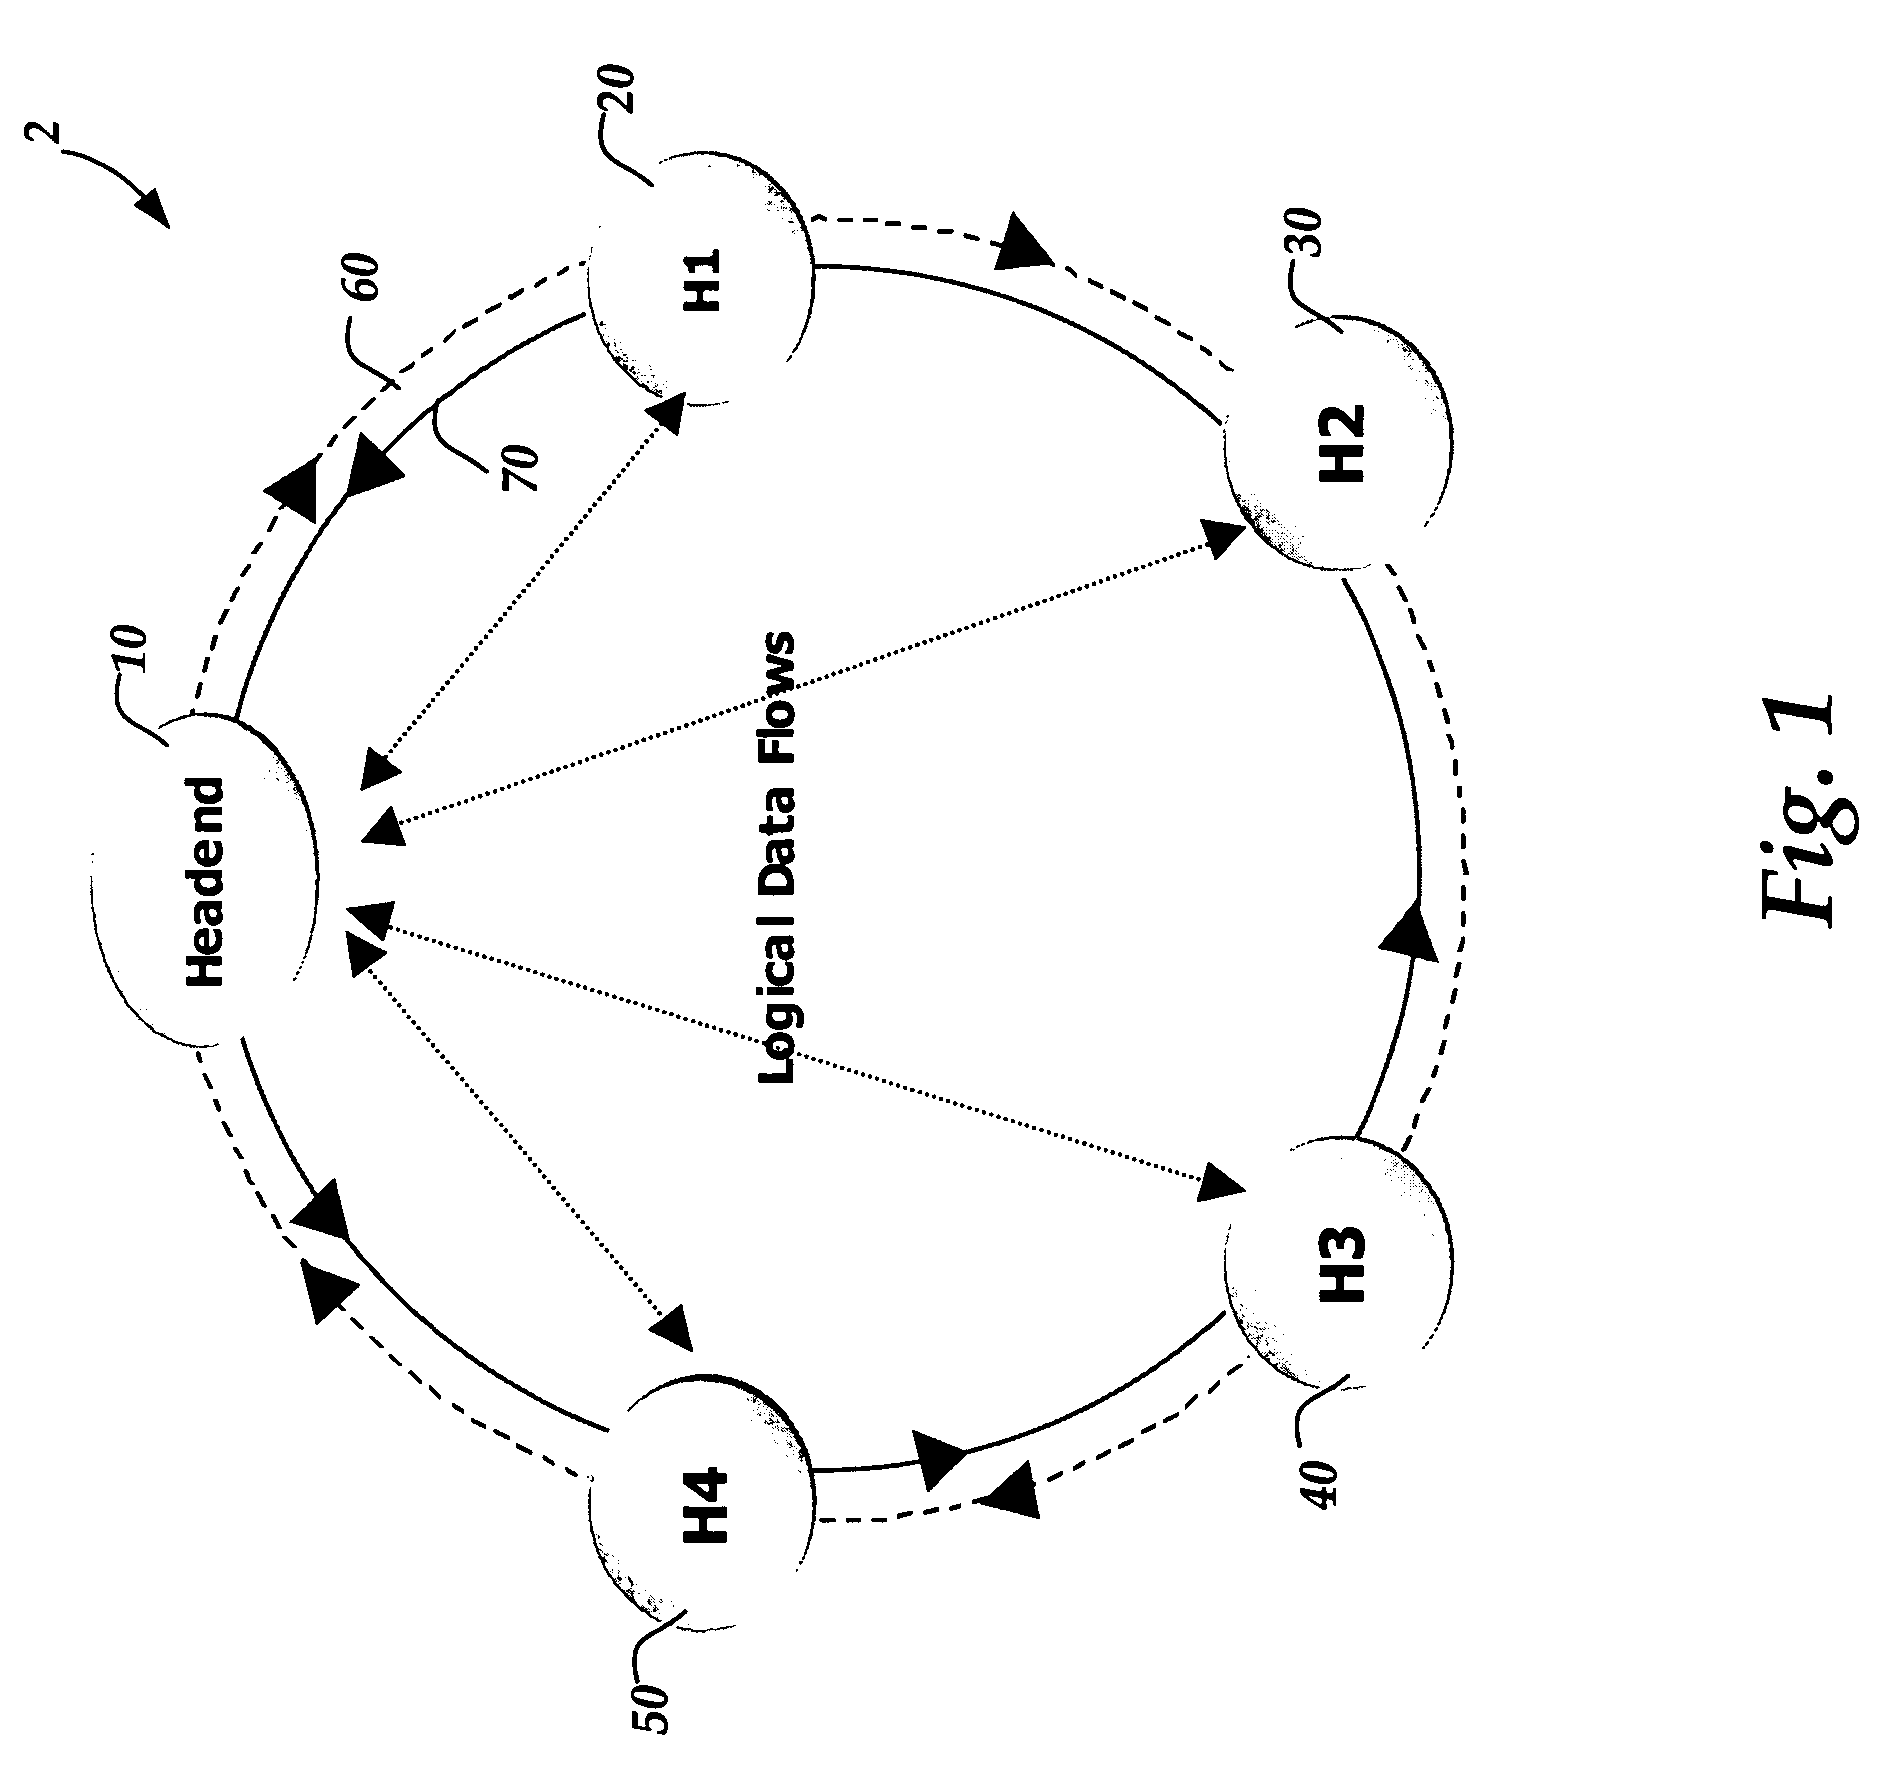 Apparatus and methods for the communication and fault management of data in a multipath data network